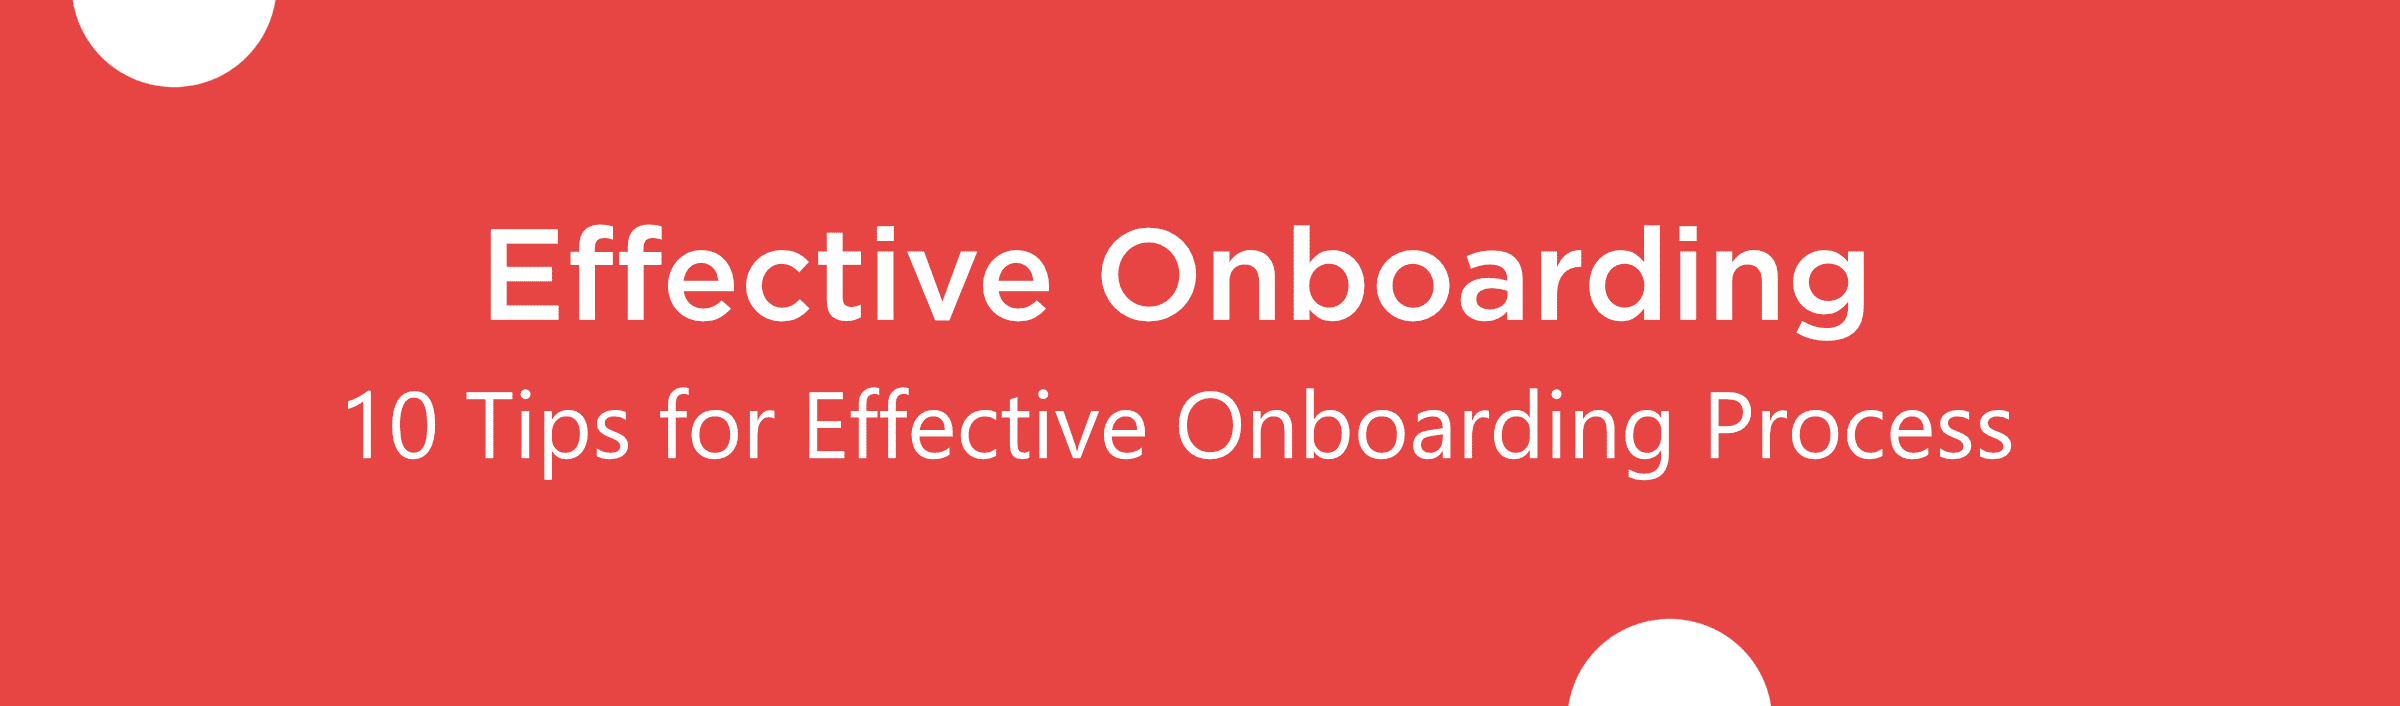 Effective Onboarding: 10 Tips for Effective Onboarding Process